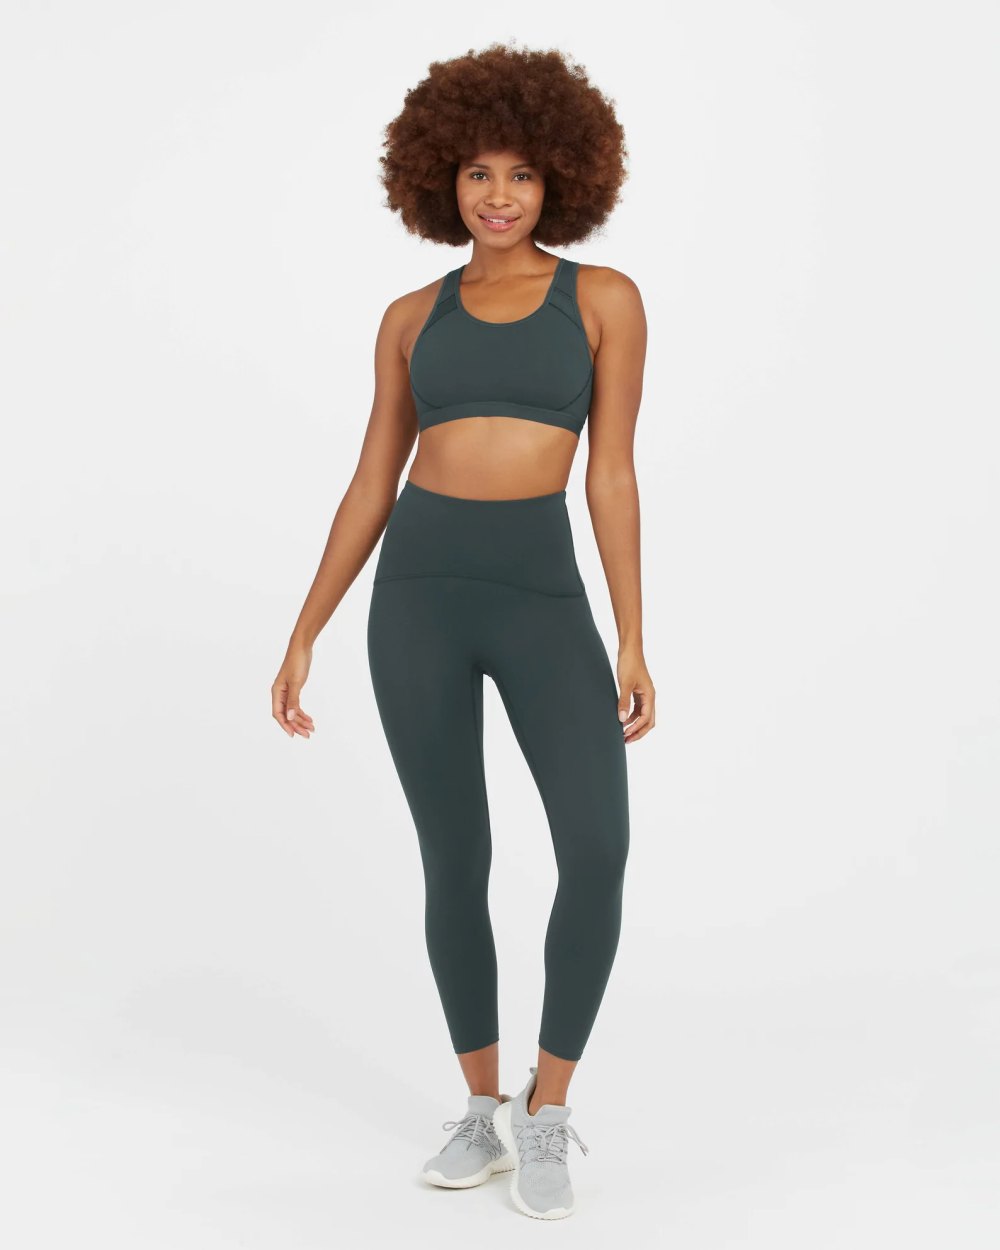 Shop the Spanx Summer Sale — Up to 30% Off Slimming Styles